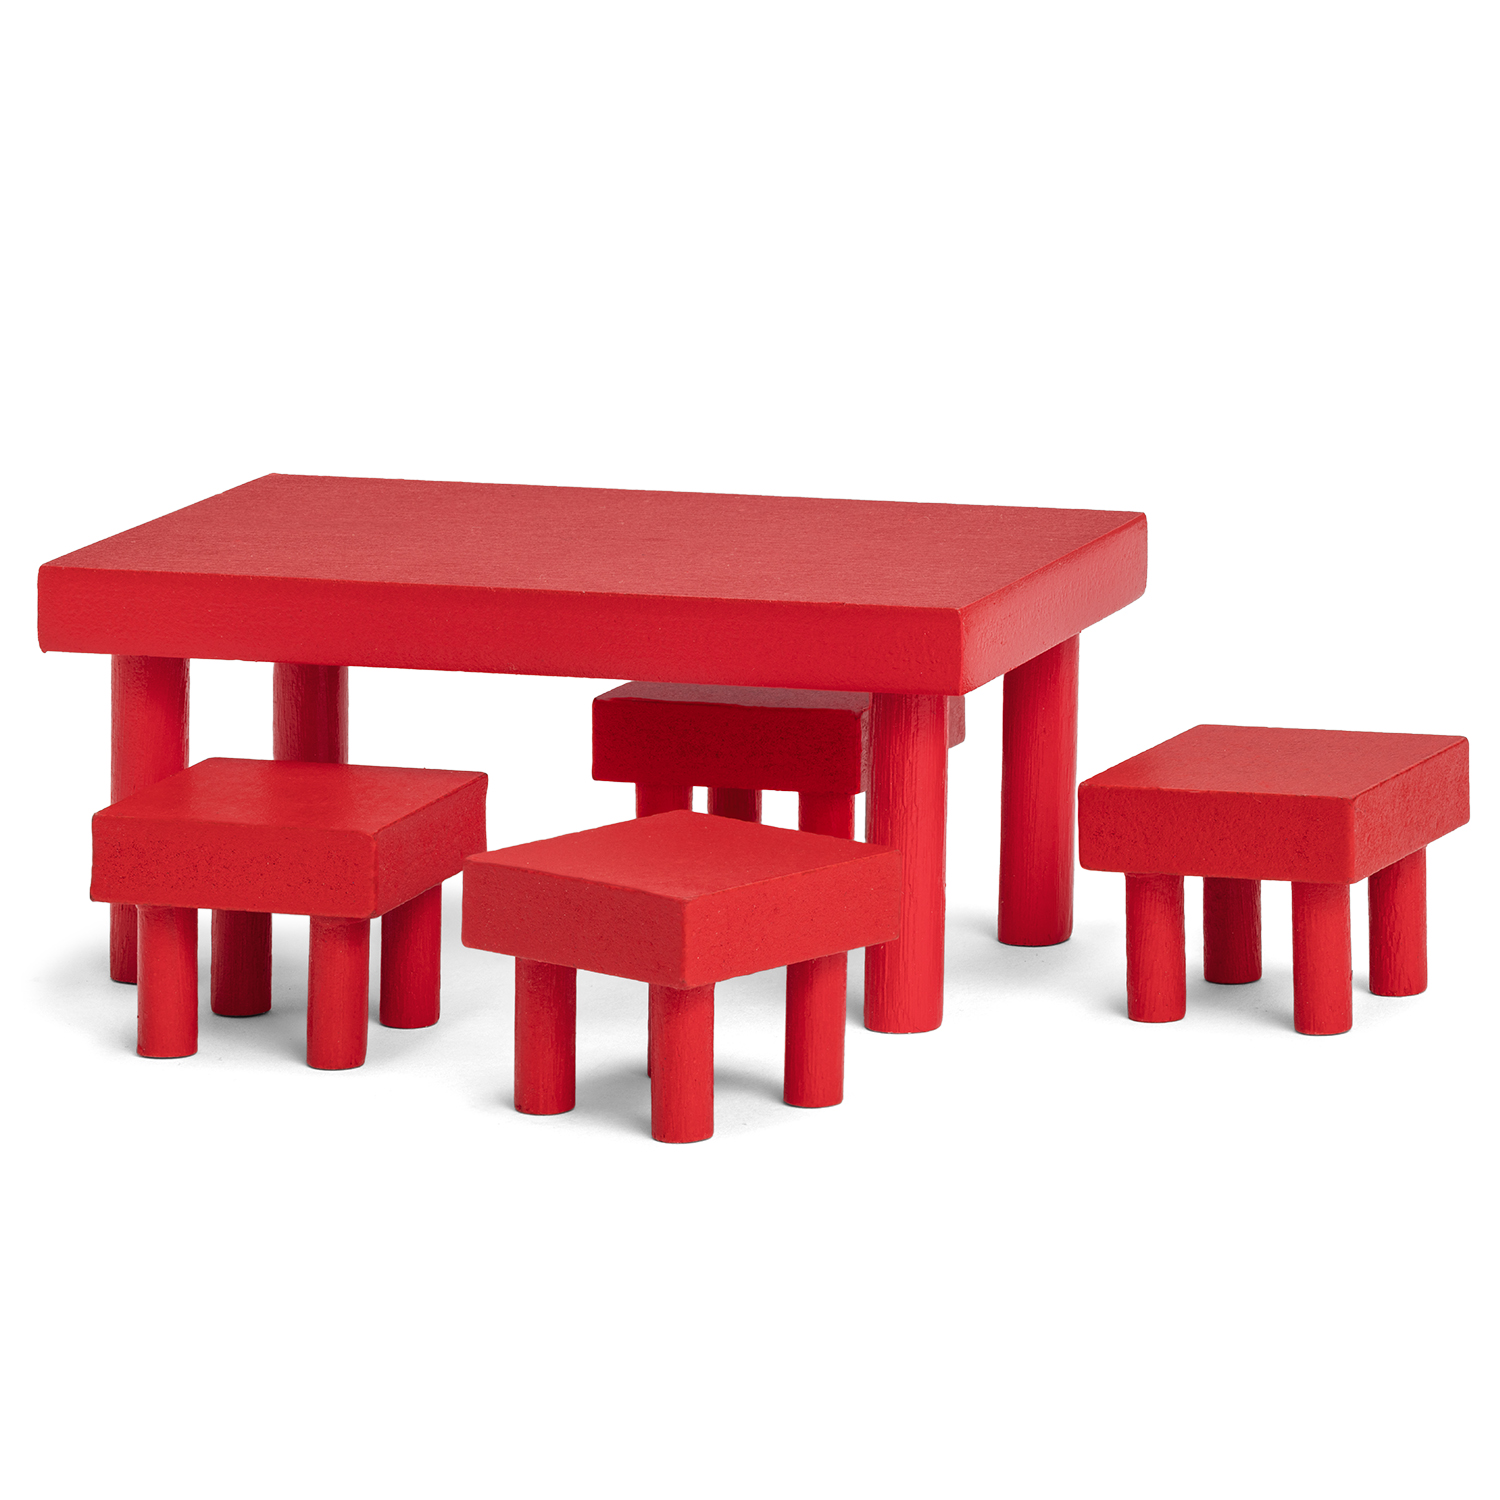 Wooden toys pippi doll's house furniture furniture set